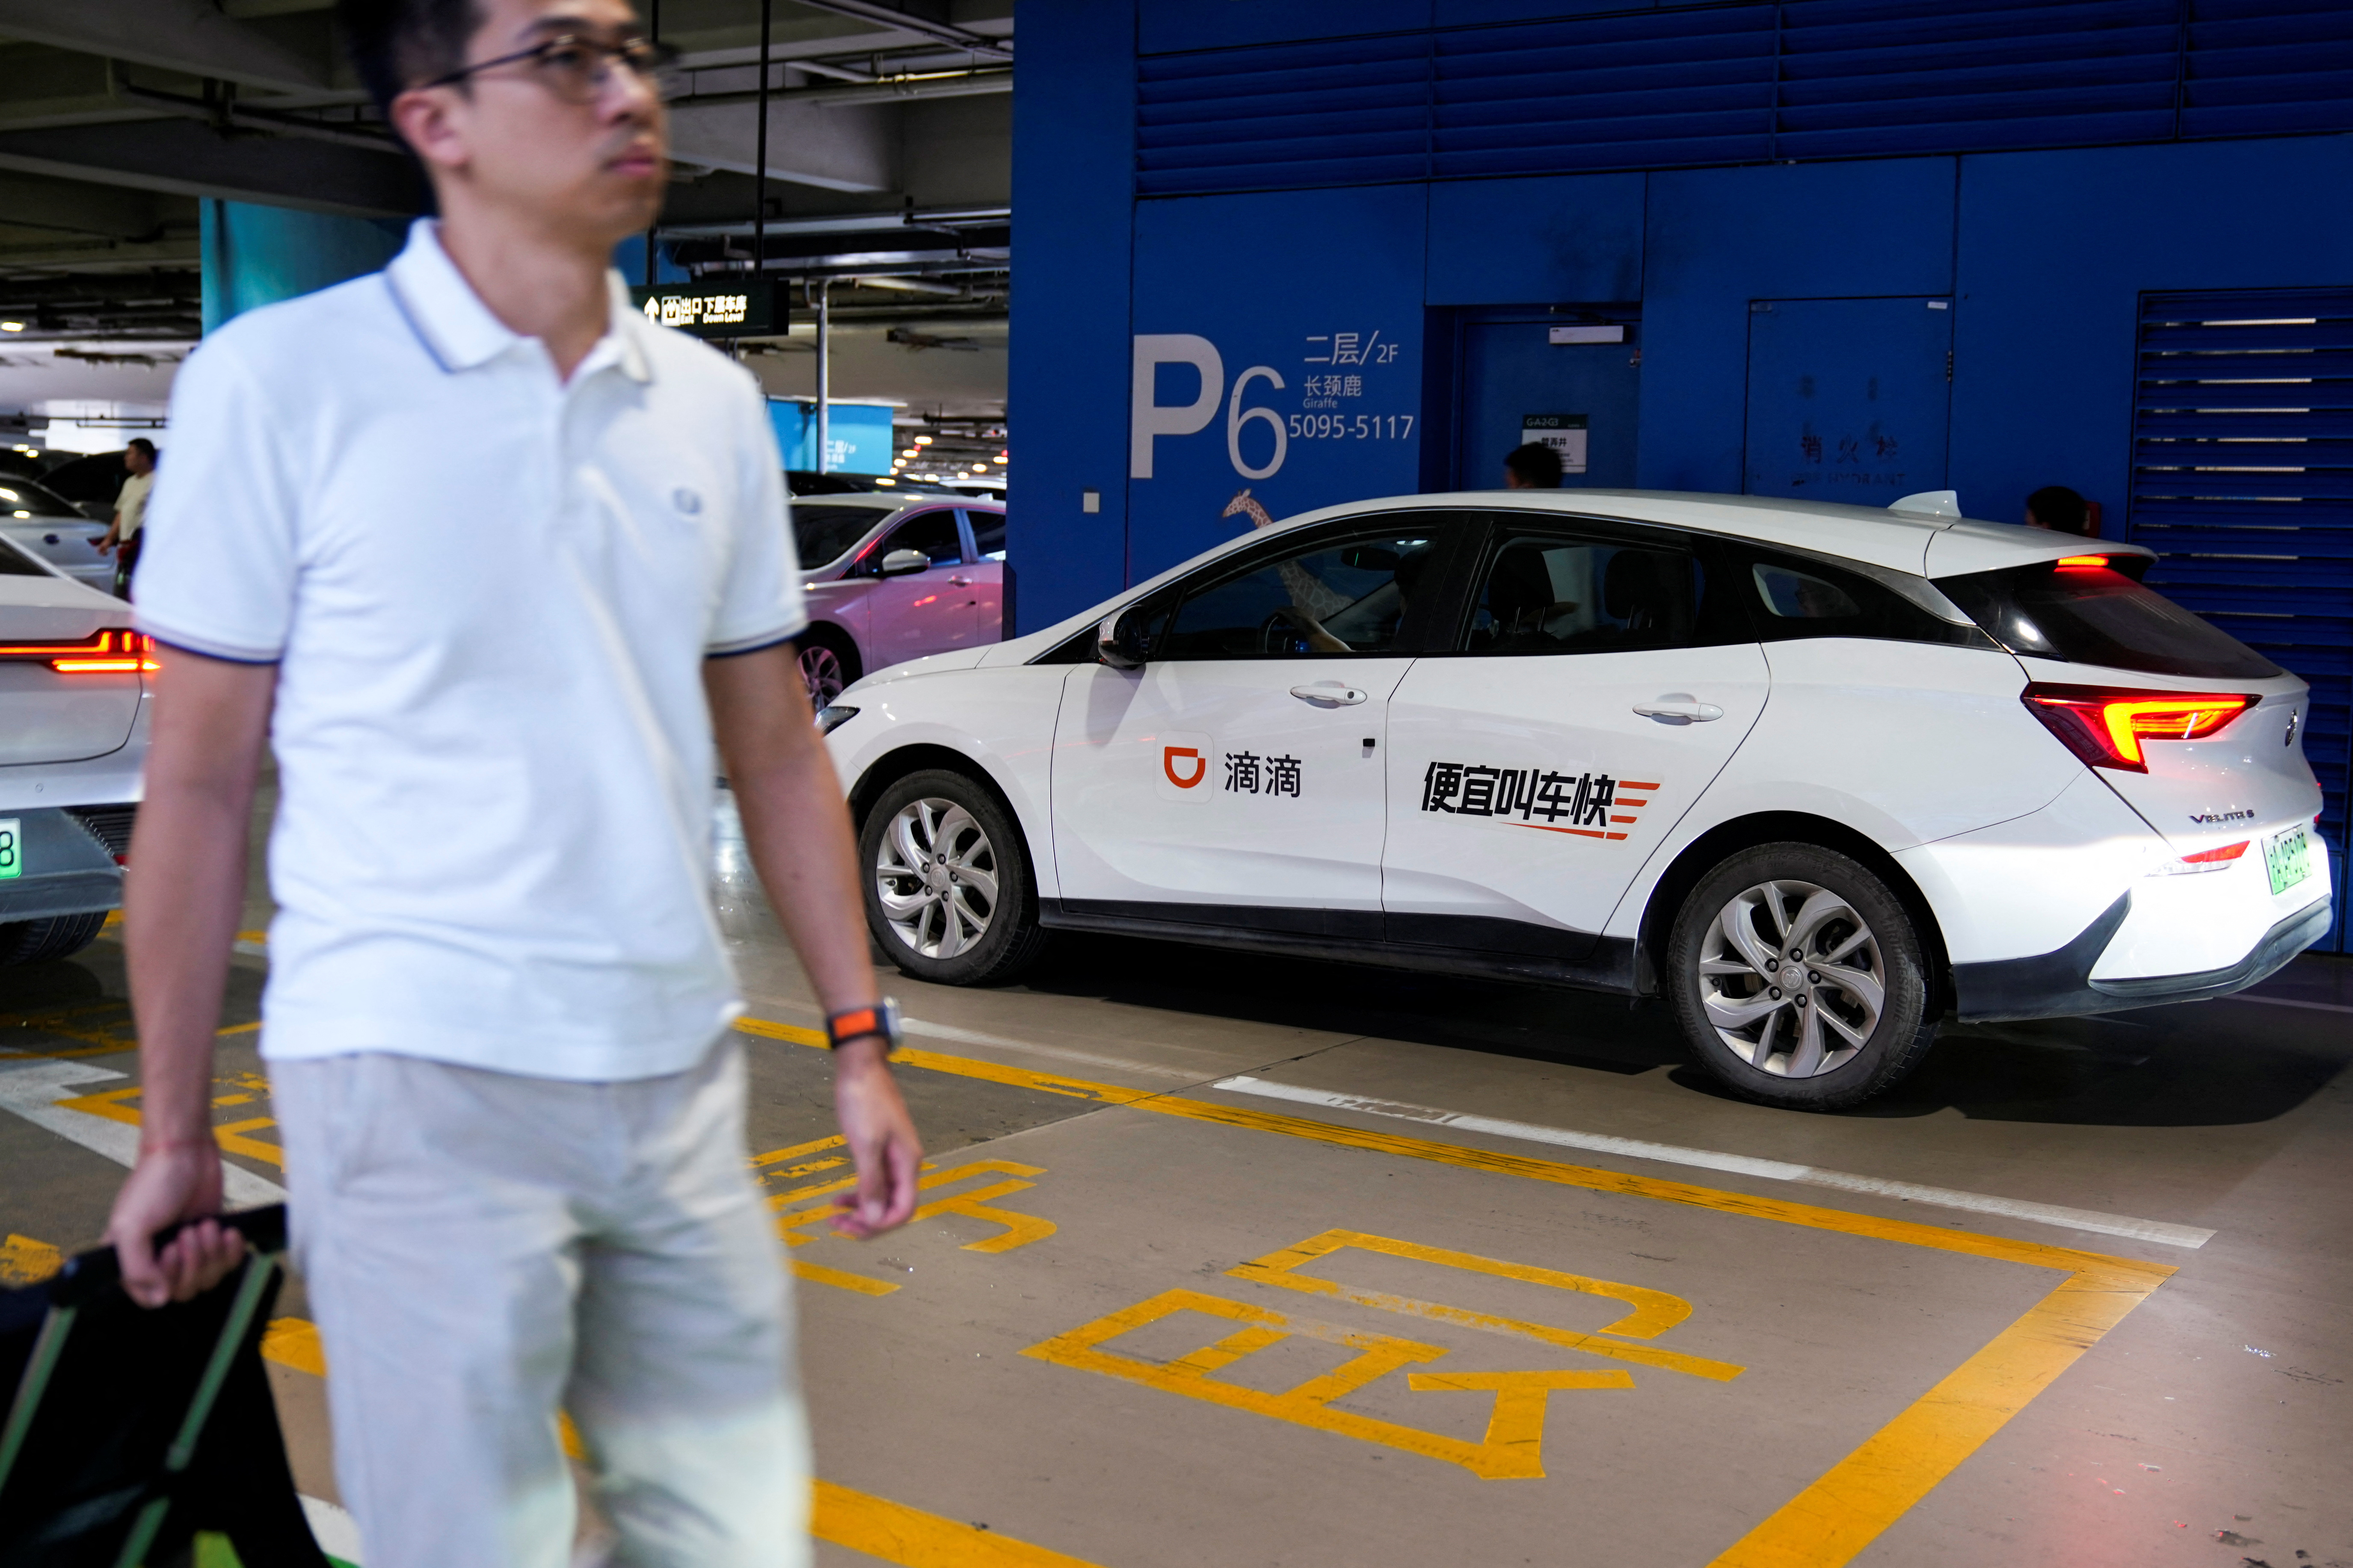 A man passes by a car of Chinese ride-hailing service Didi at the Shanghai Hongqiao International Airport in Shanghai